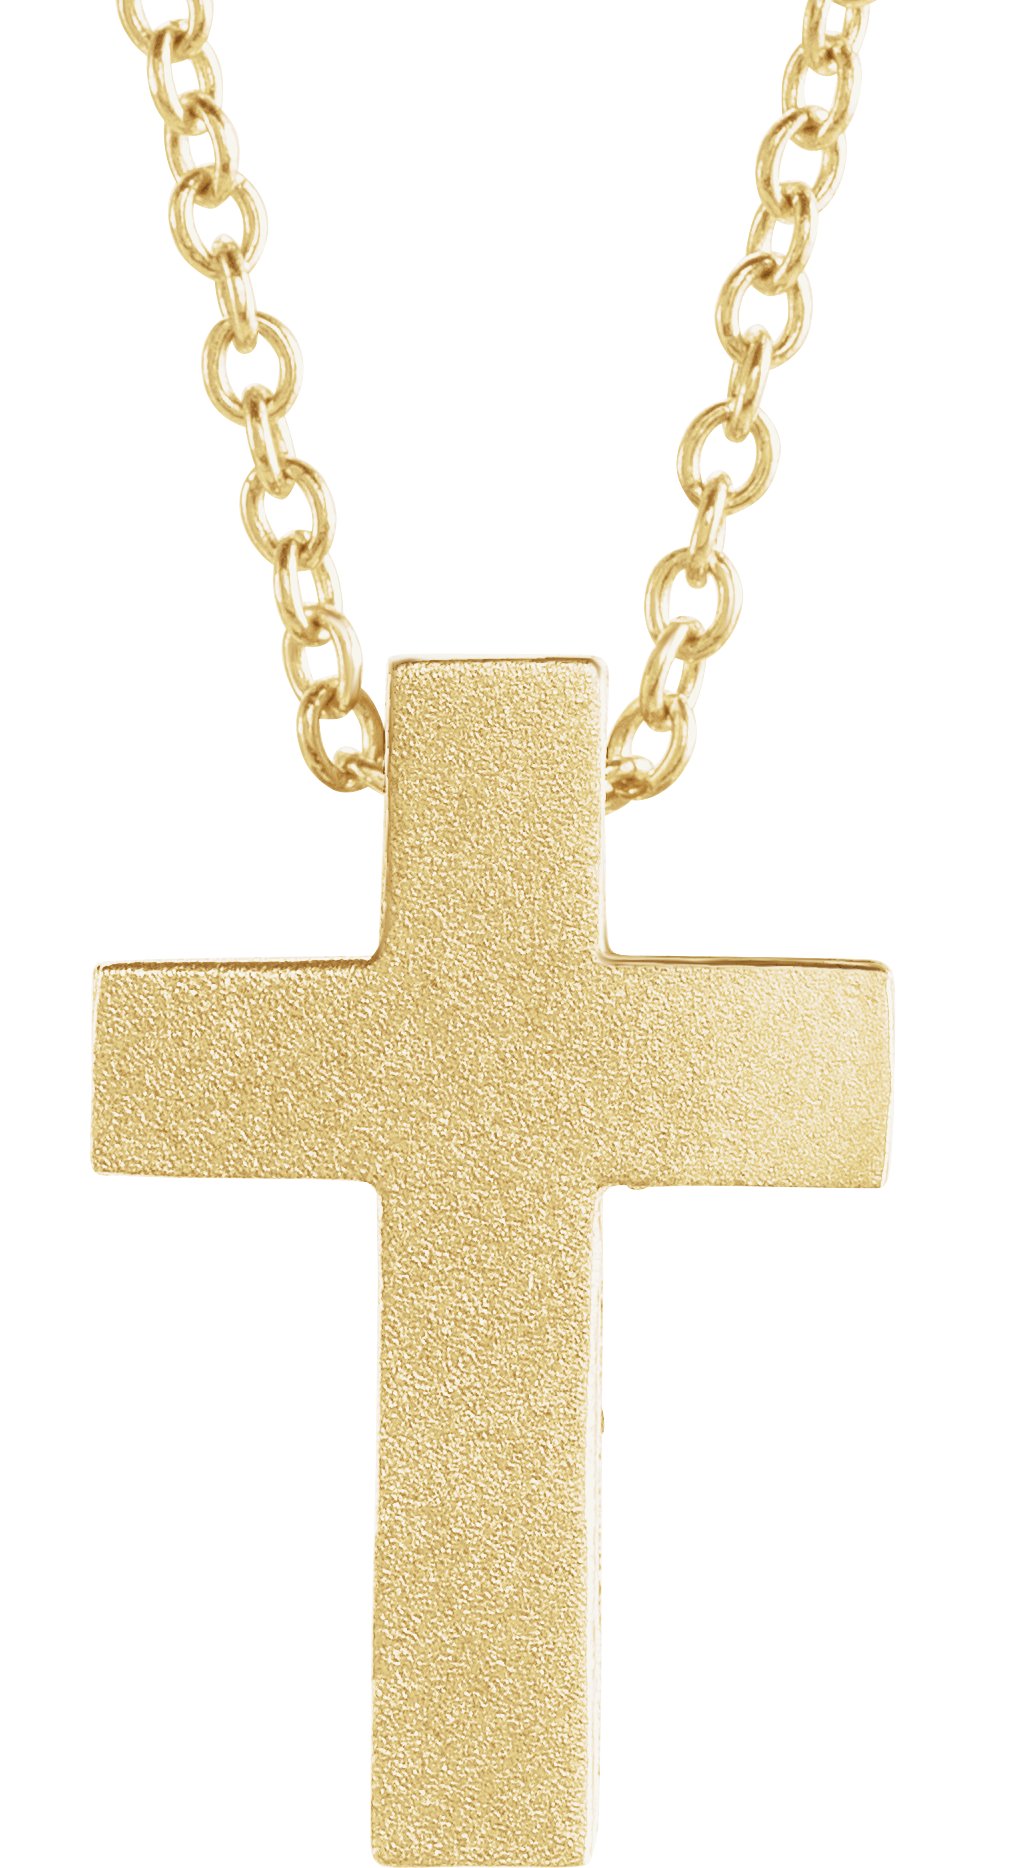 Sterling Silver Men's Enamel Gothic Initial Necklace